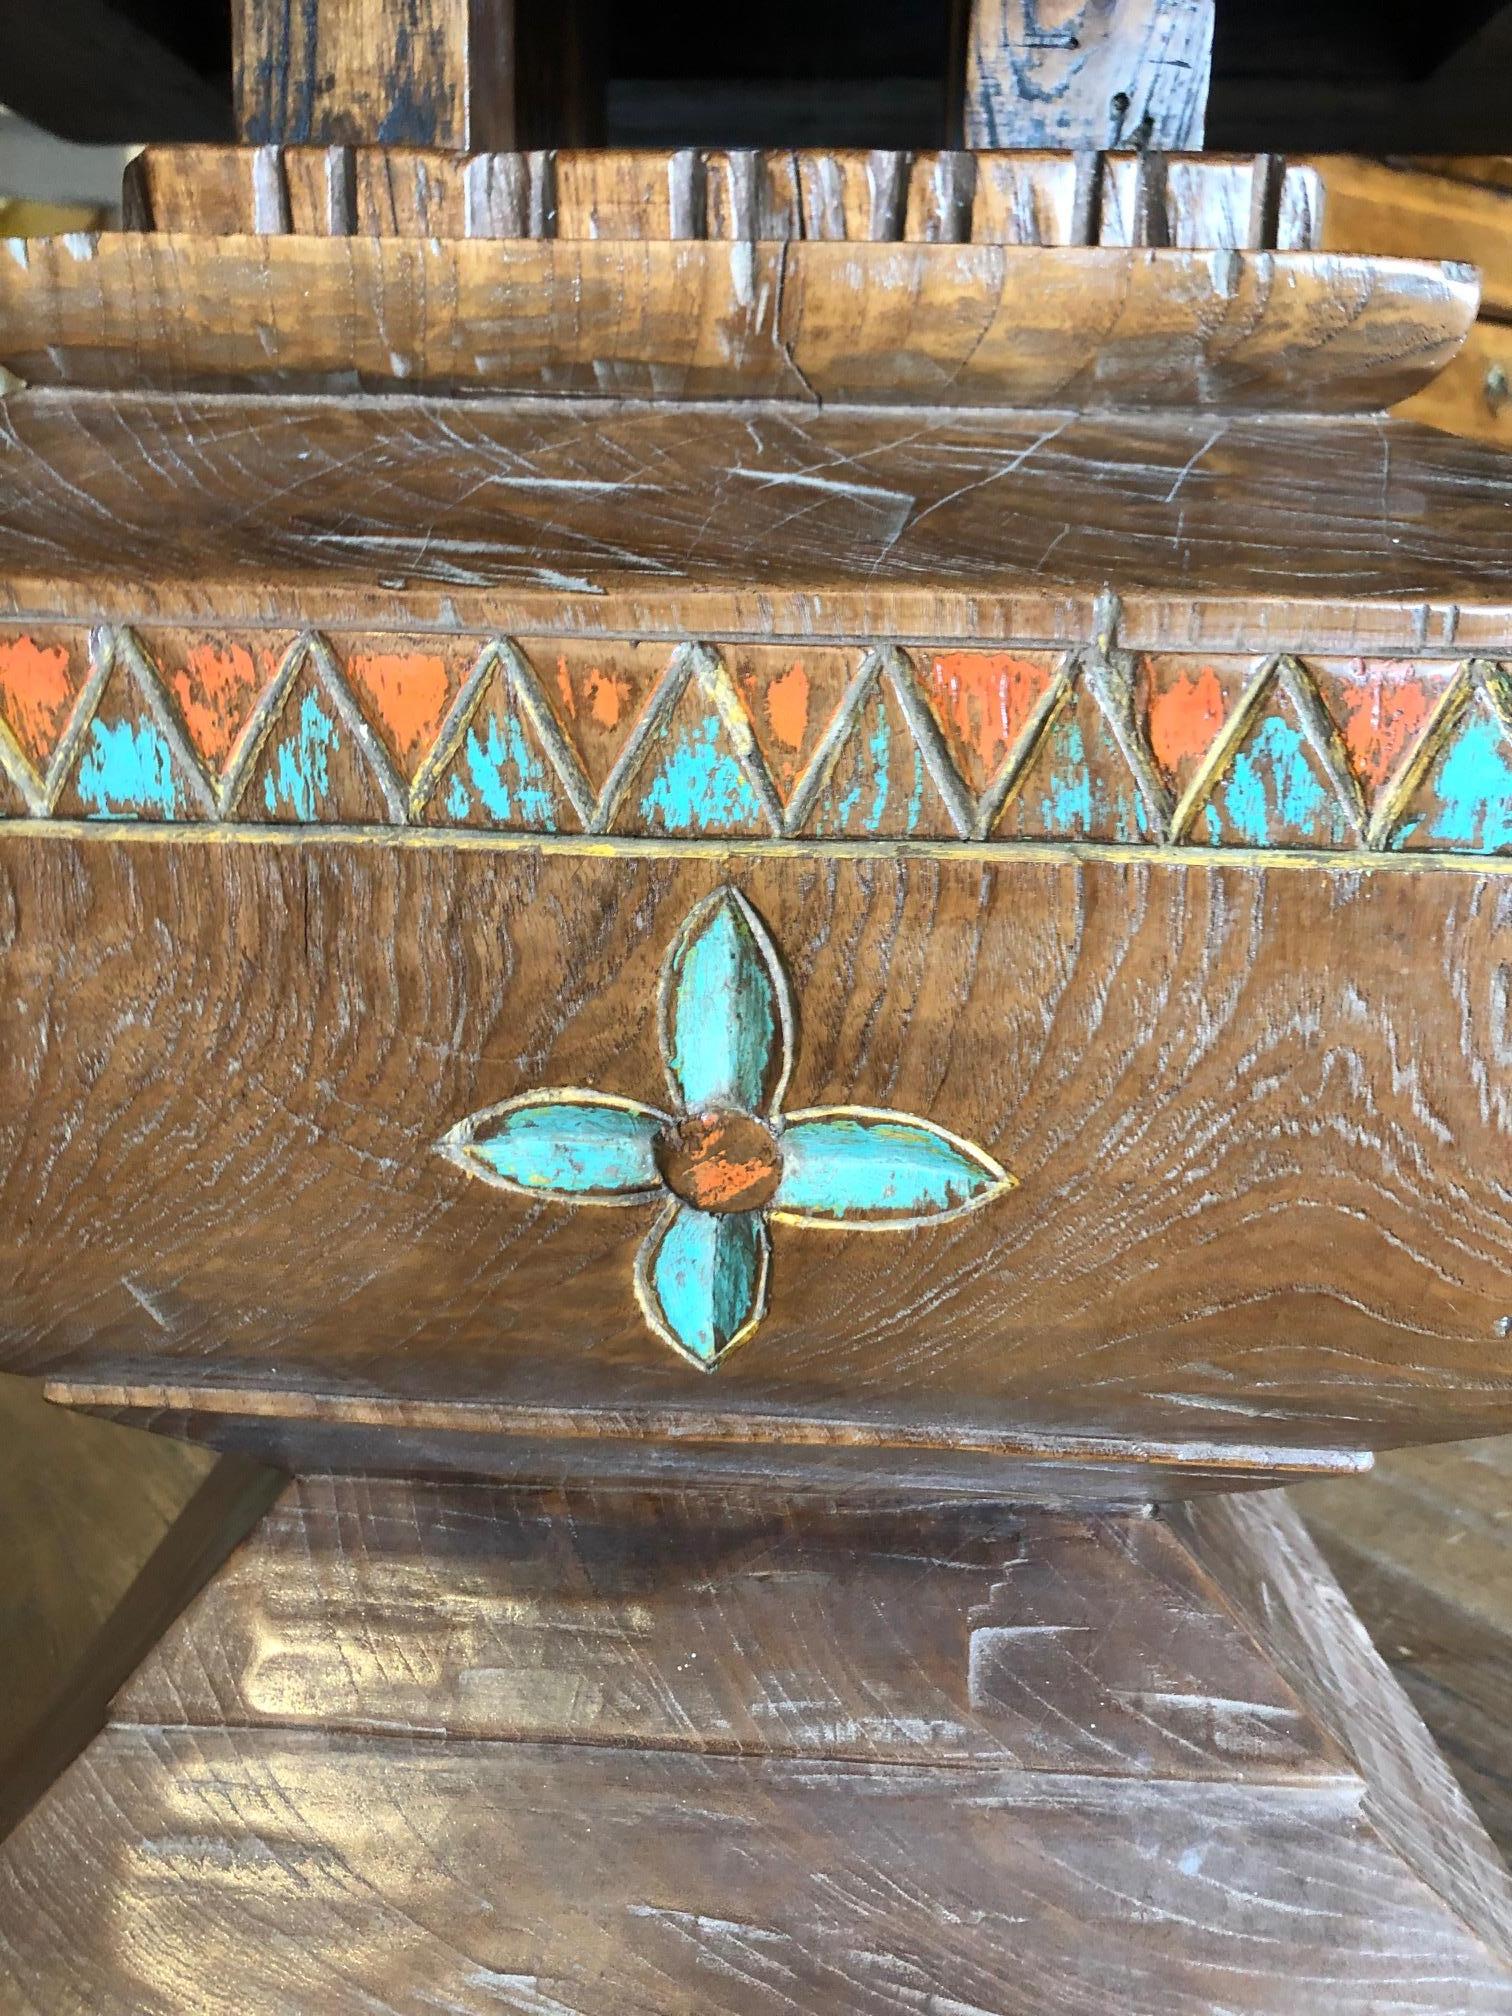 Carved teak with original painted decoration and new tops fabricated from re-purposed teak.
Made in Bali, circa 1880.